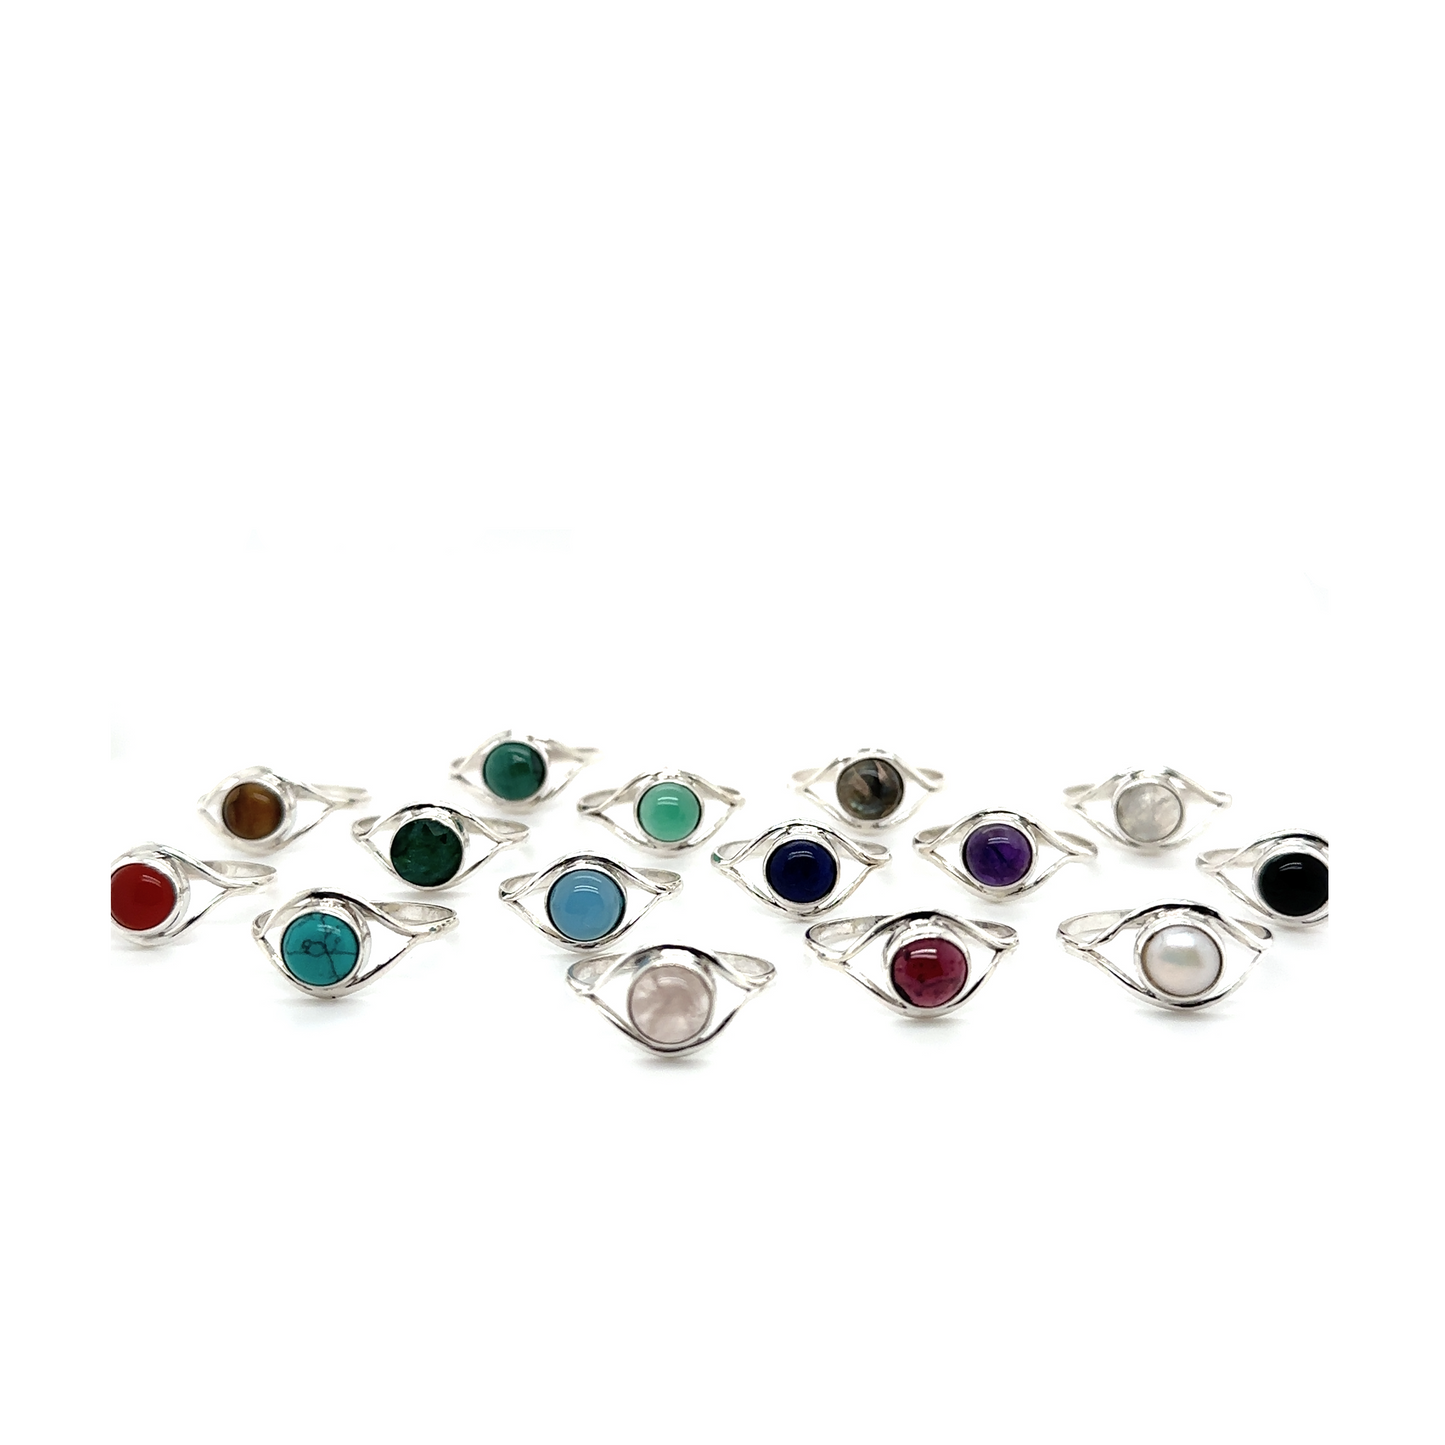 A collection of Abstract Stone Eye Rings adorned with abstract eye gemstones in a variety of colors.